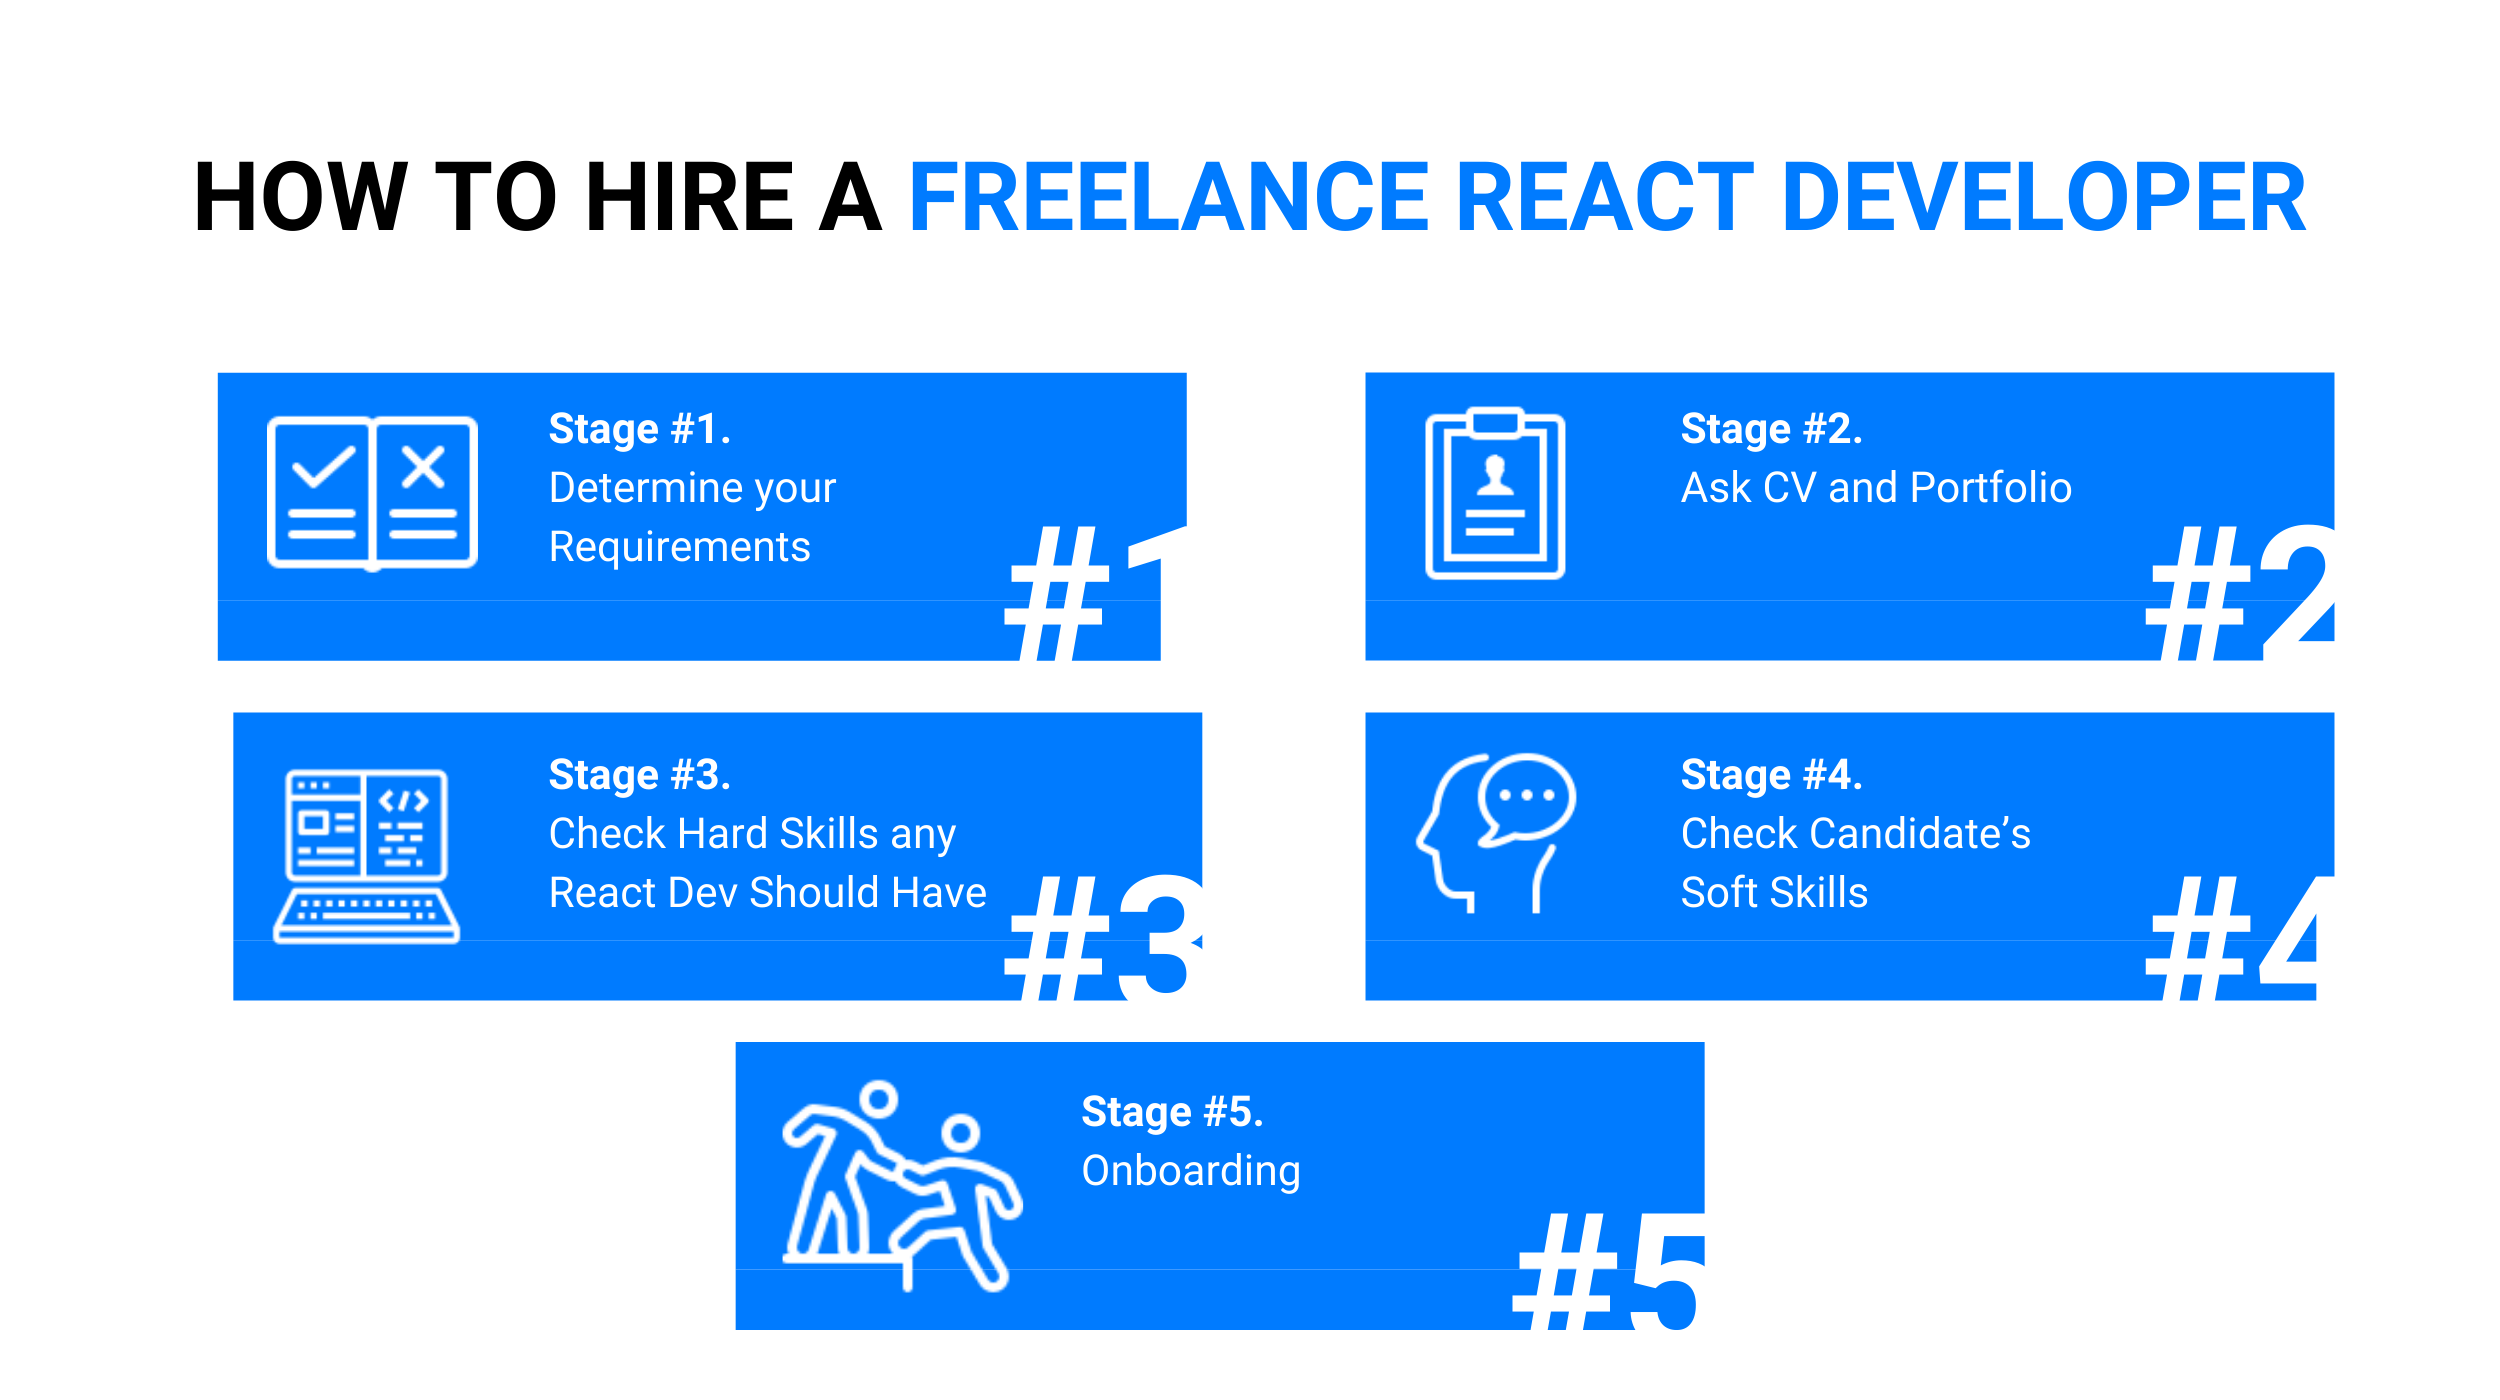 How to Hire a Freelance React Developer